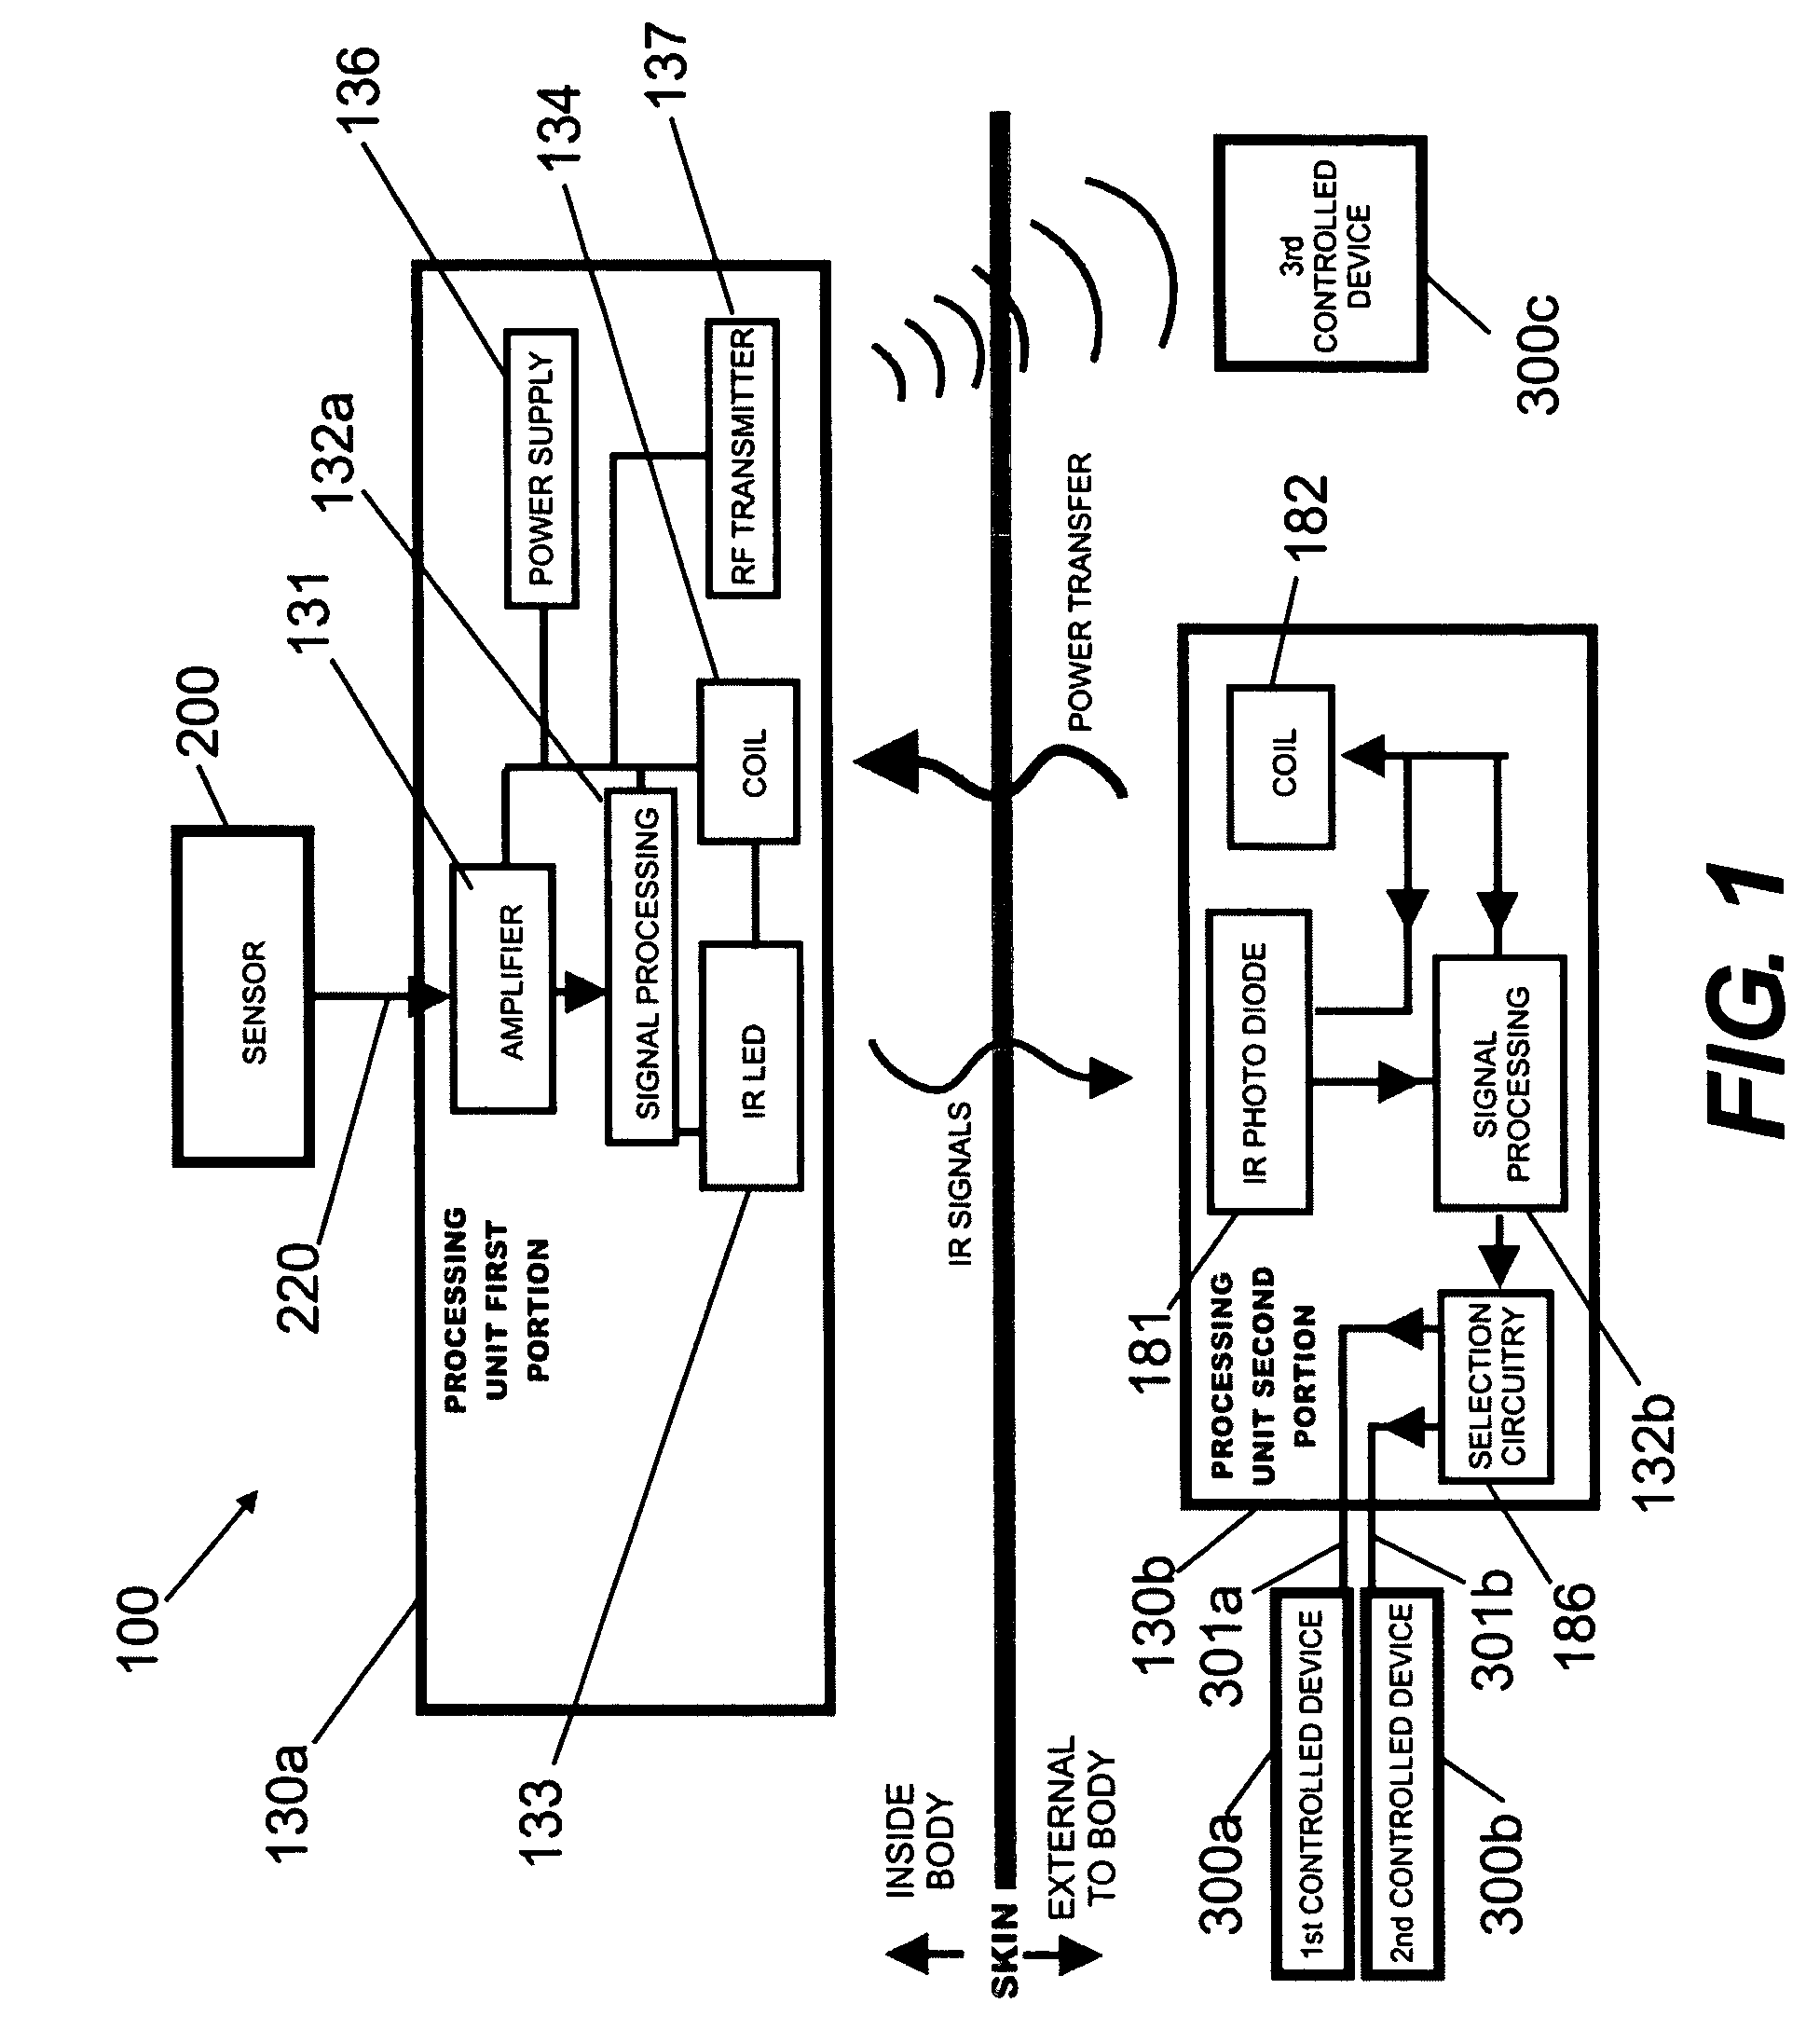 Biological interface system